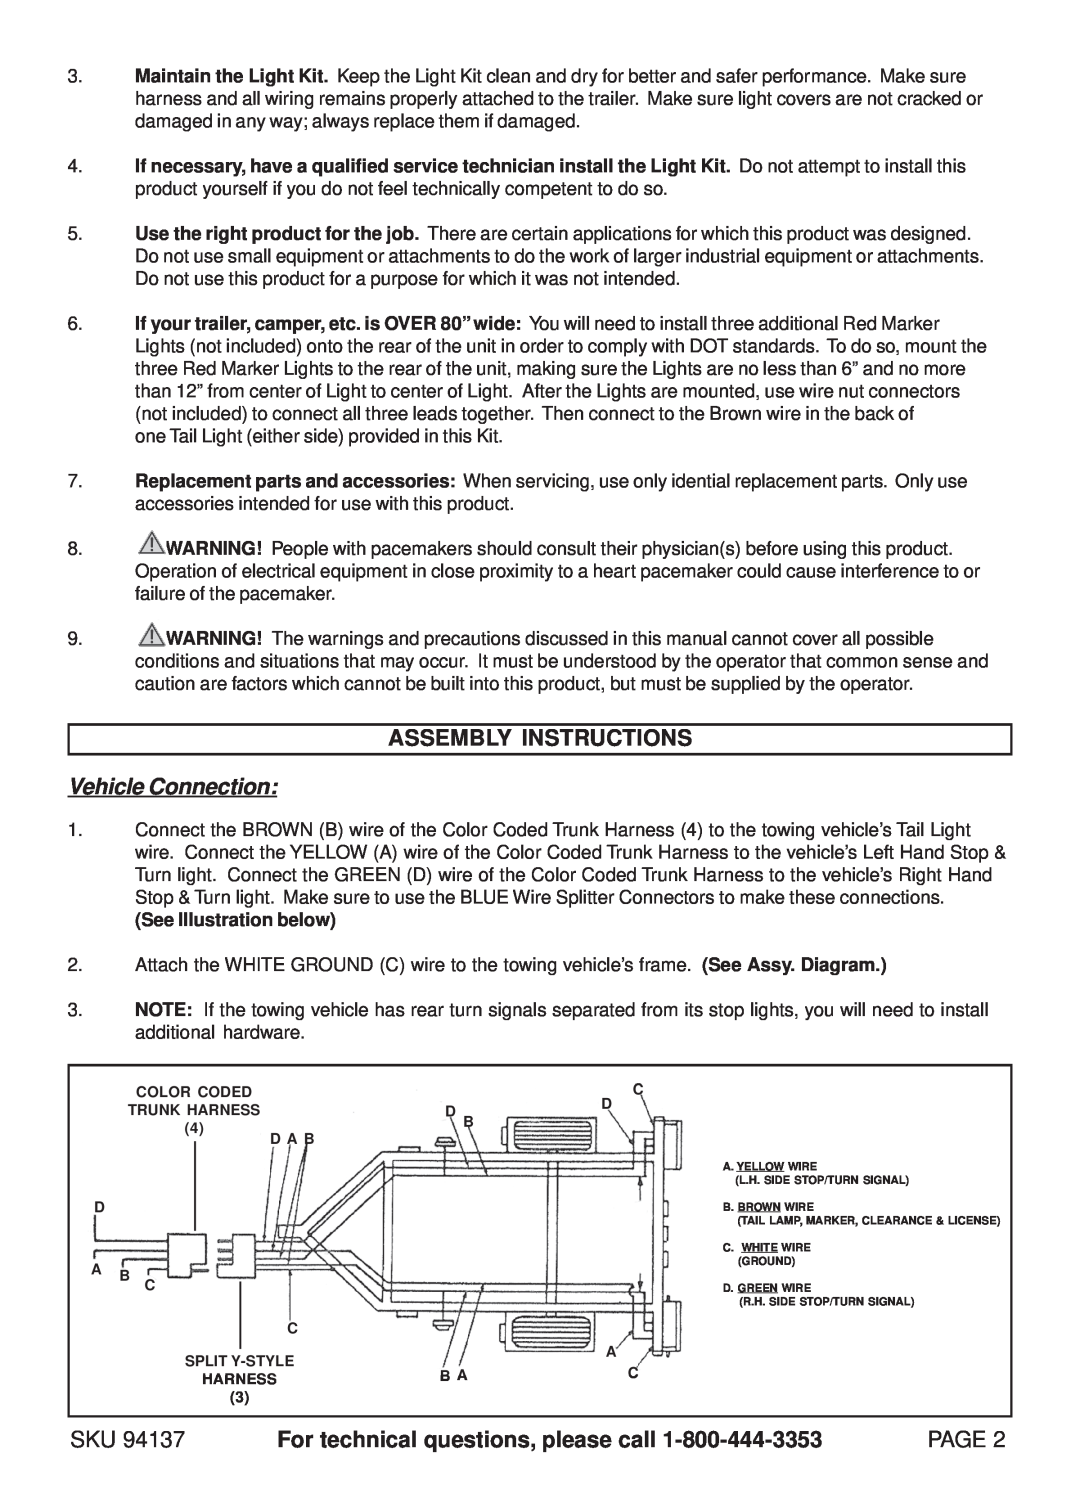 Harbor Freight Tools 94137 Assembly Instructions, Vehicle Connection, For technical questions, please call, Page 